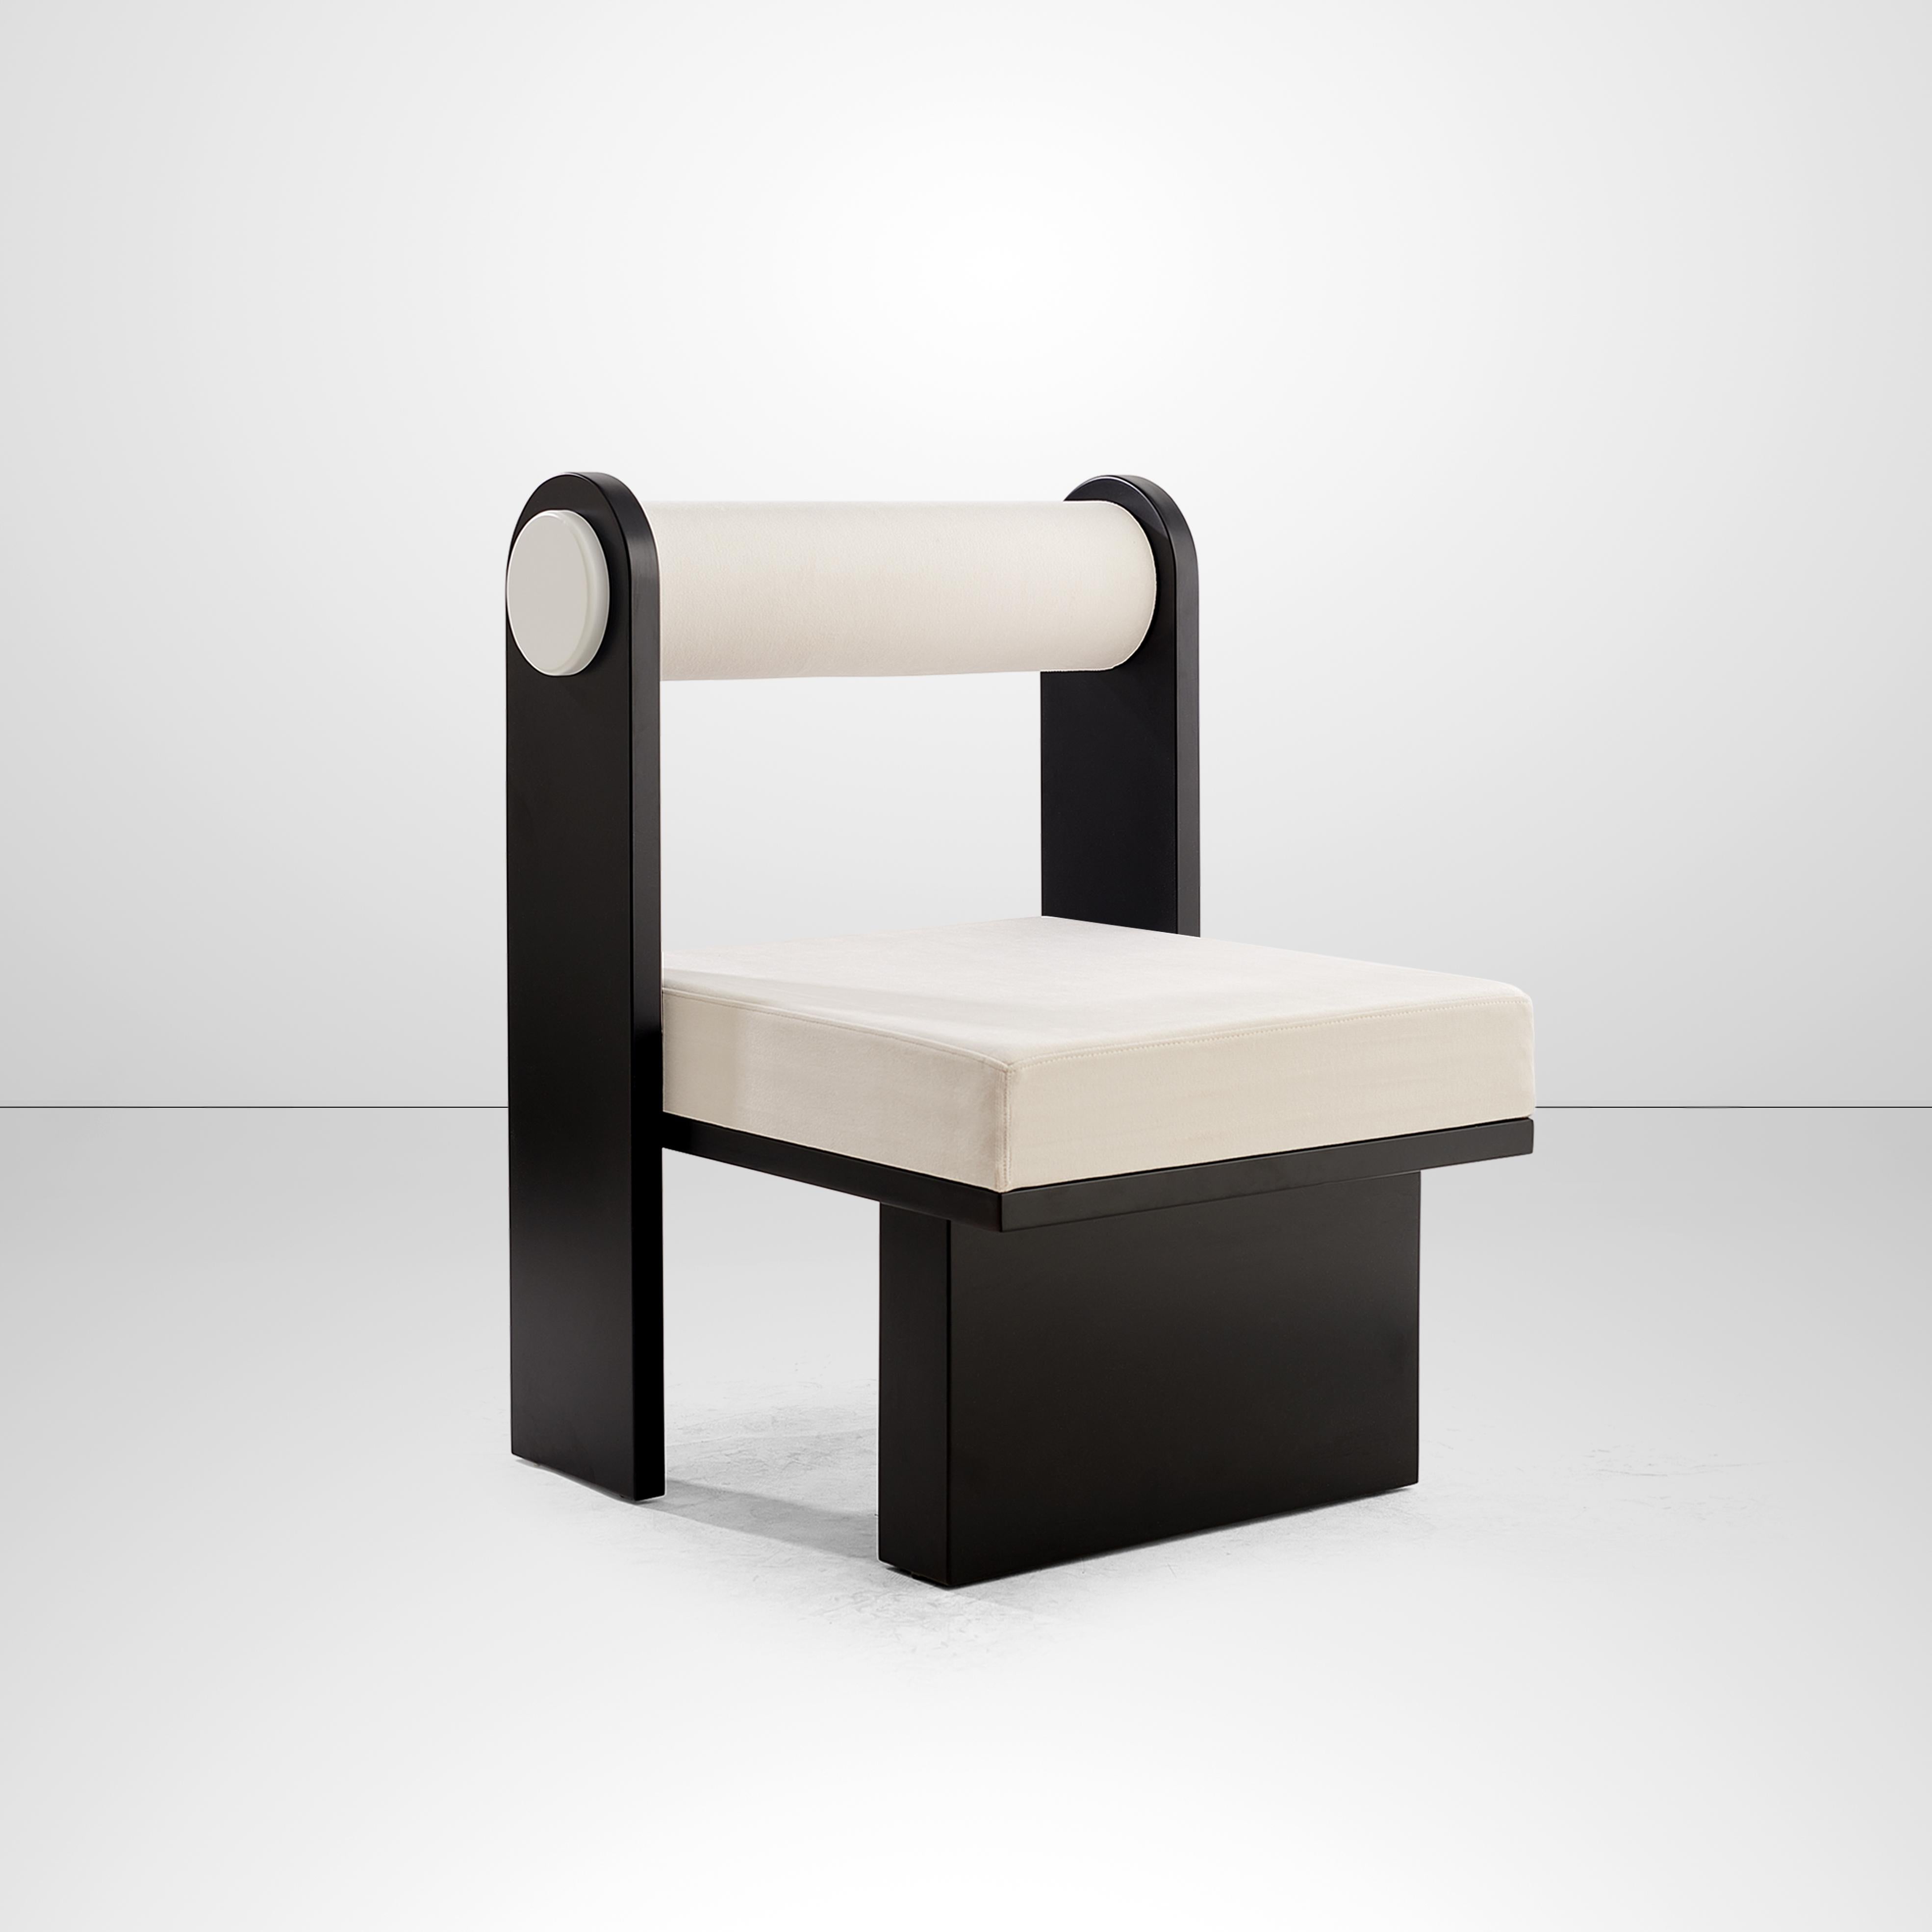 Panda lounge chair by Melis Tatlicibasi 
Materials: White velvet upholstery, laquered natural oak
Dimensions: W 55 x D 65 x H 85 cm

The Panda collection is a minimalist work with some far eastern touches. Inspired by the shy and playful